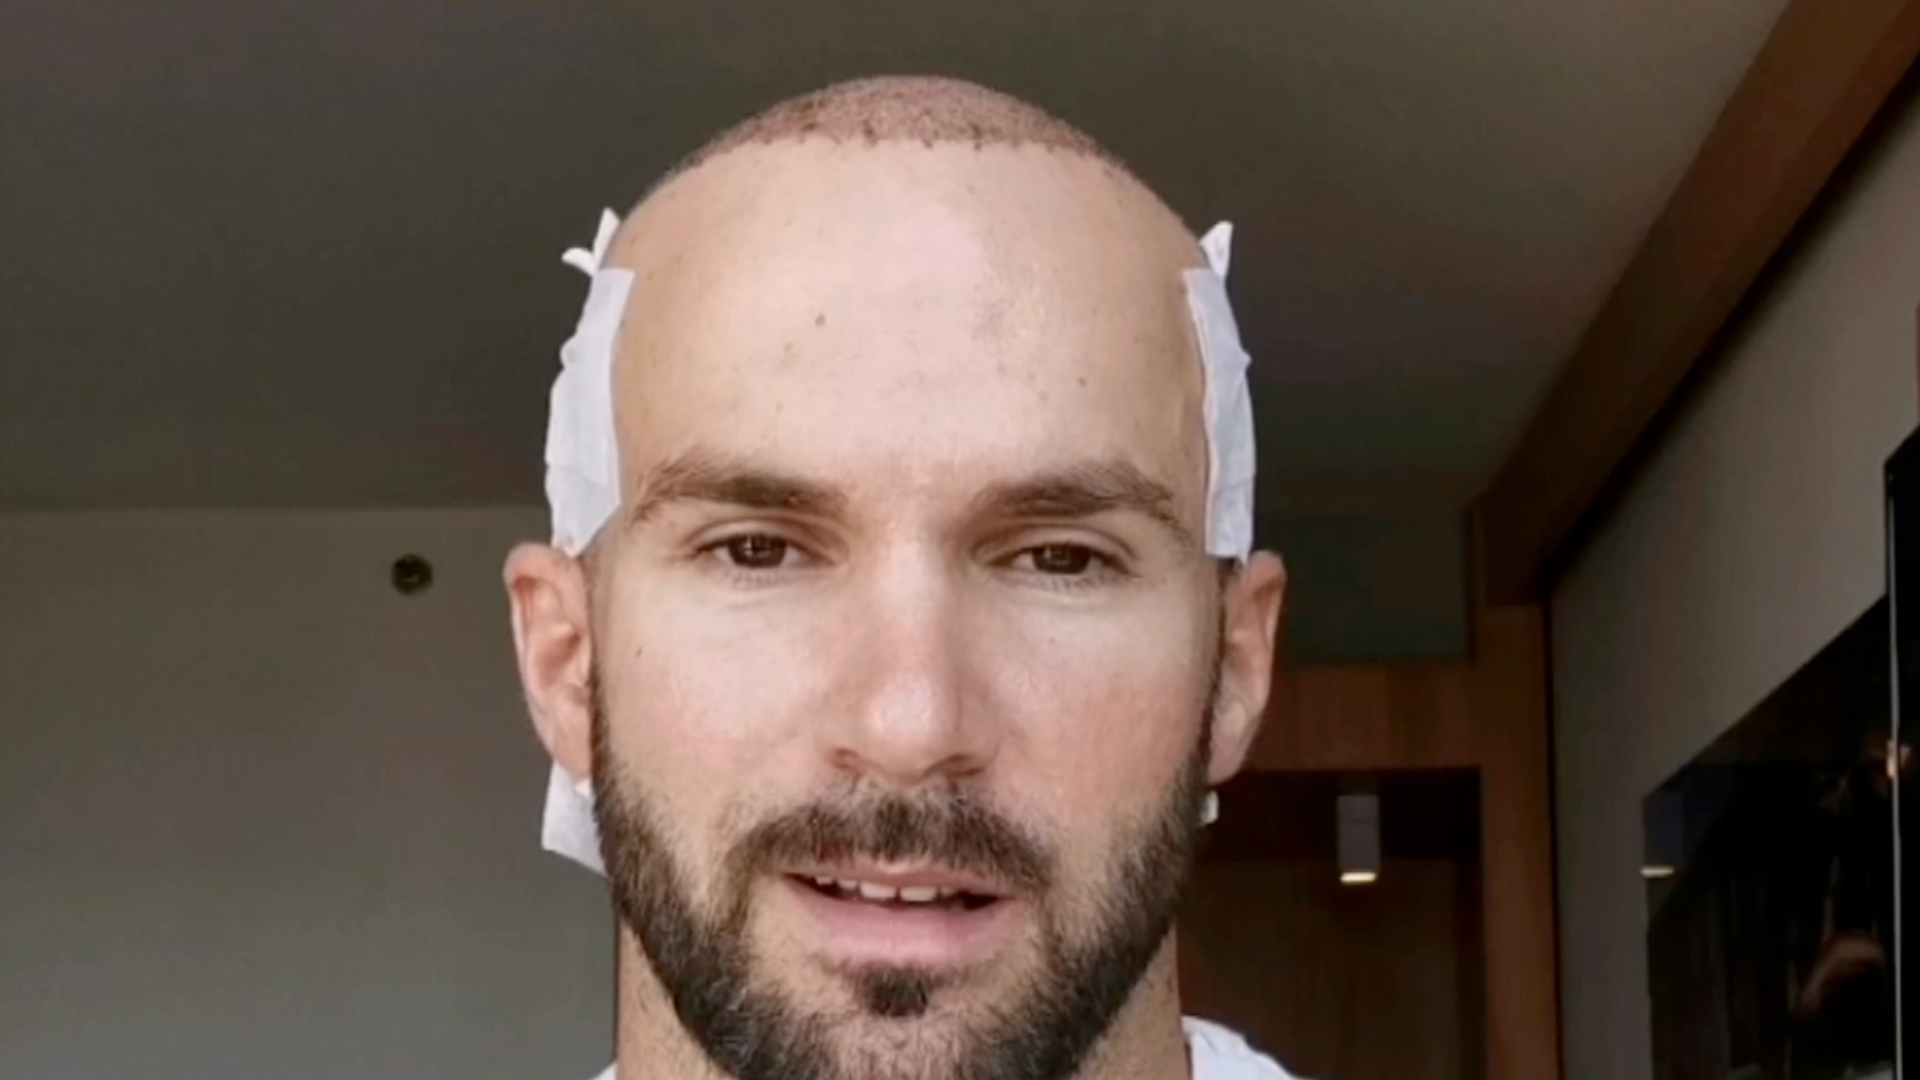 hair transplant right after the operation